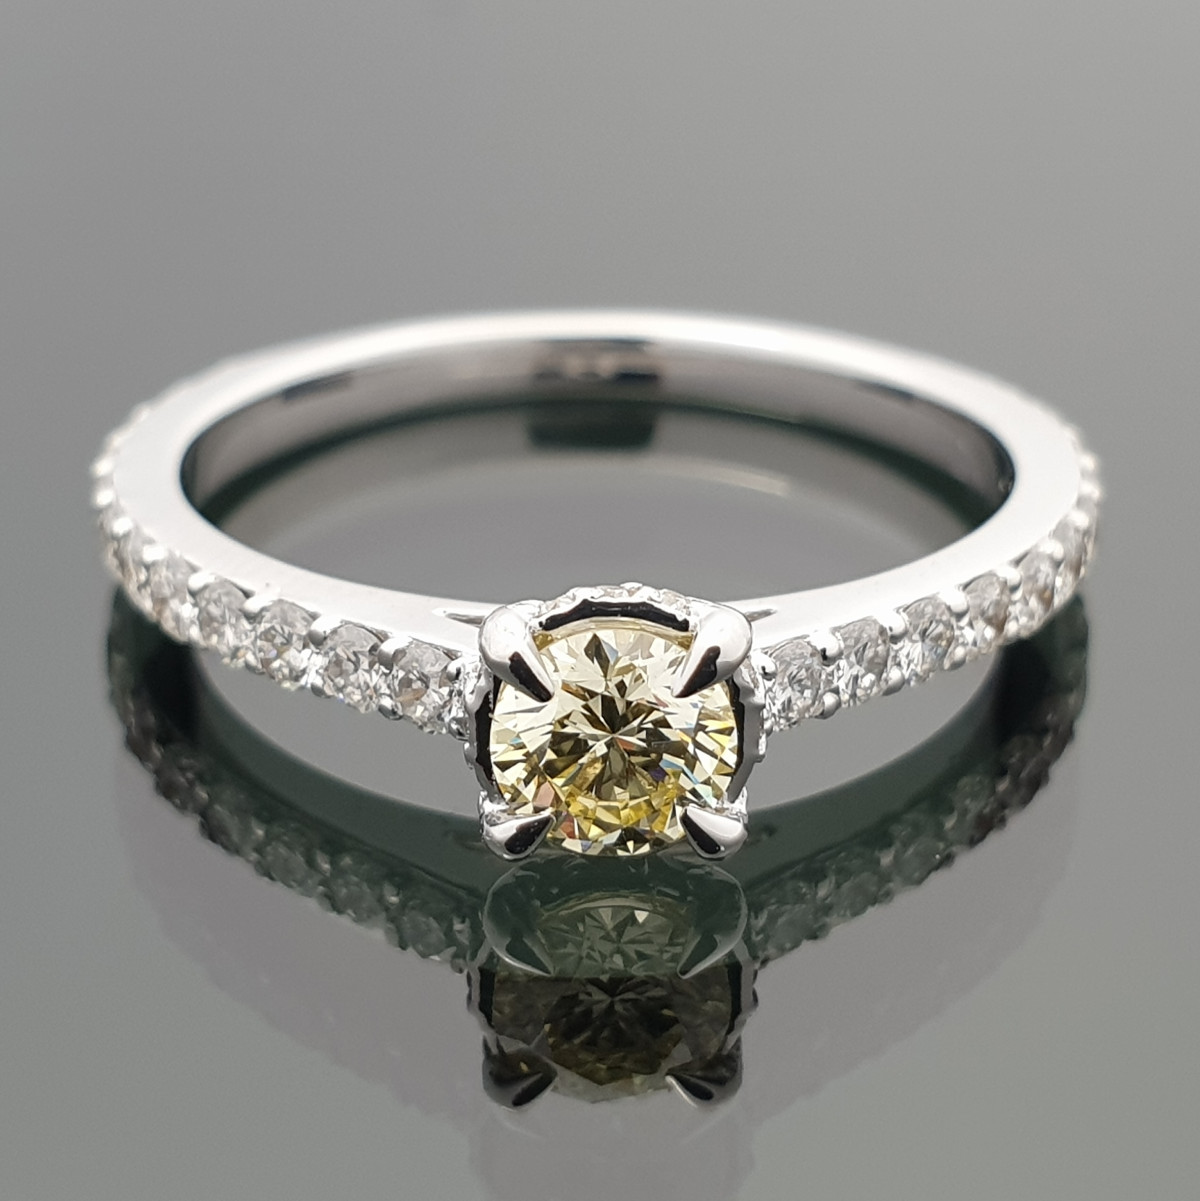  White Gold Engagement Ring Set with Fancy Diamond (1812) 1